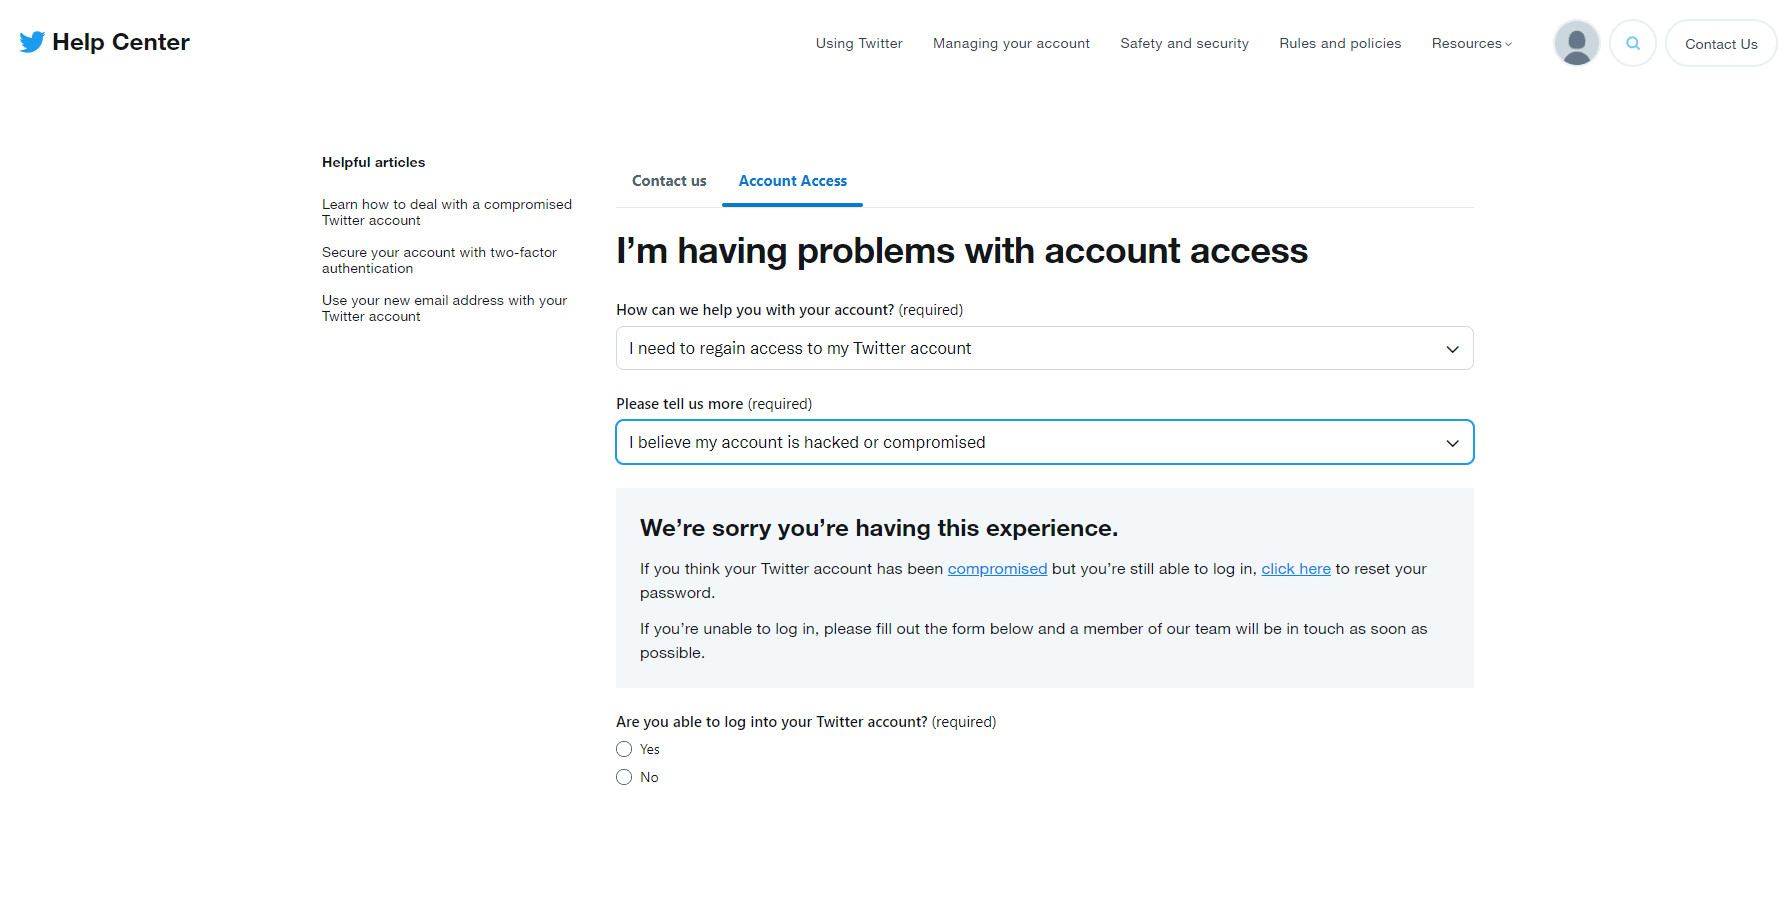 Twitter account access help page